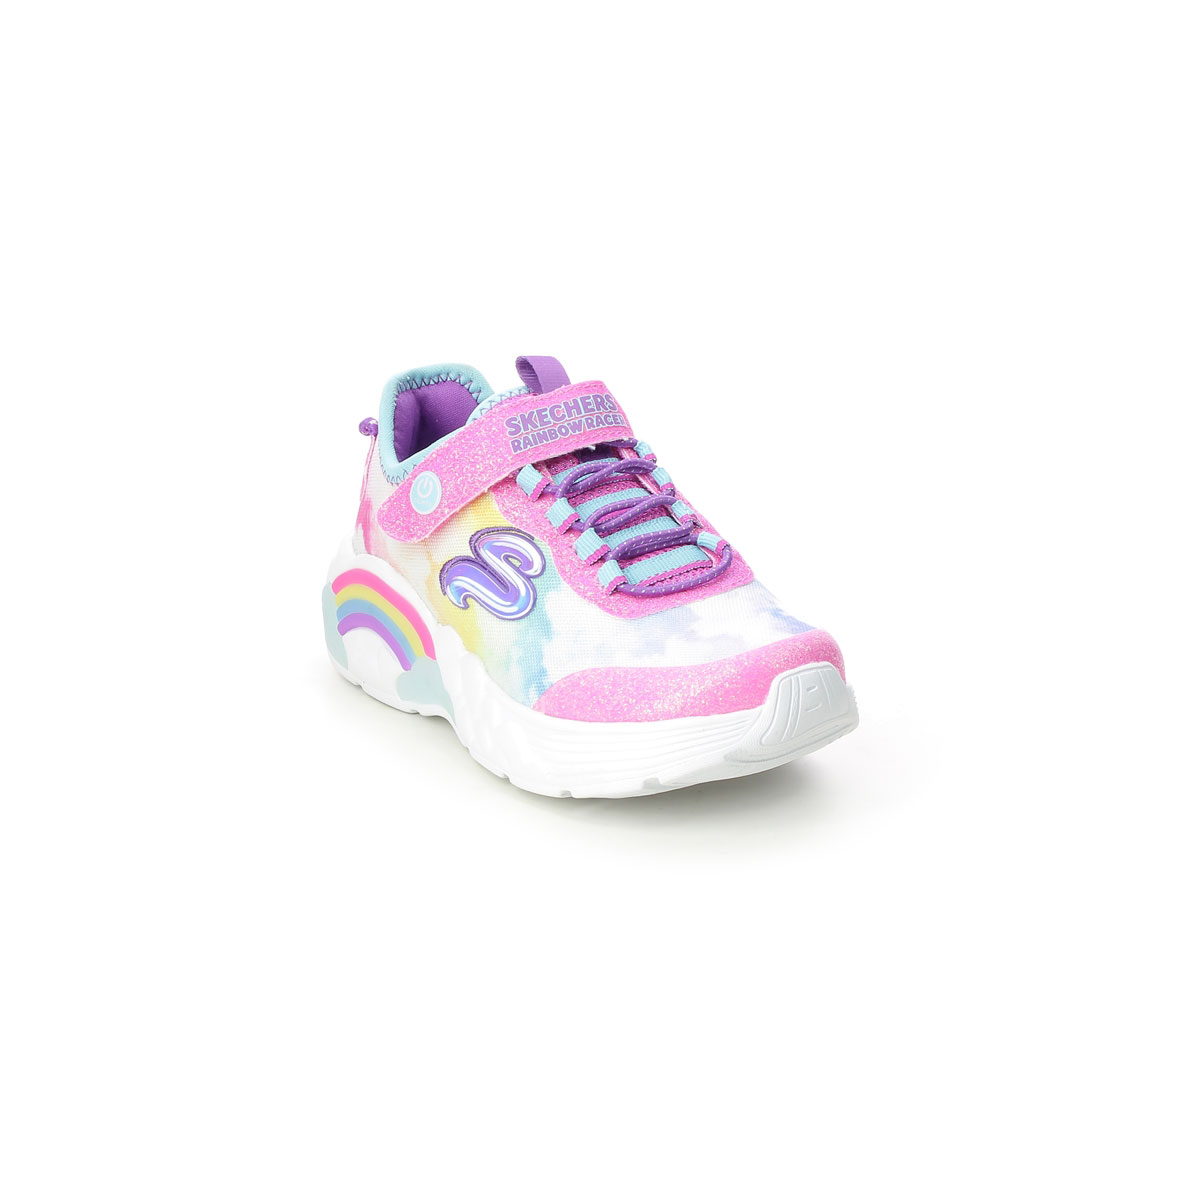 Skechers Rainbow Racer Pink Kids Girls Trainers 302300L In Size 32 In Plain Pink For kids